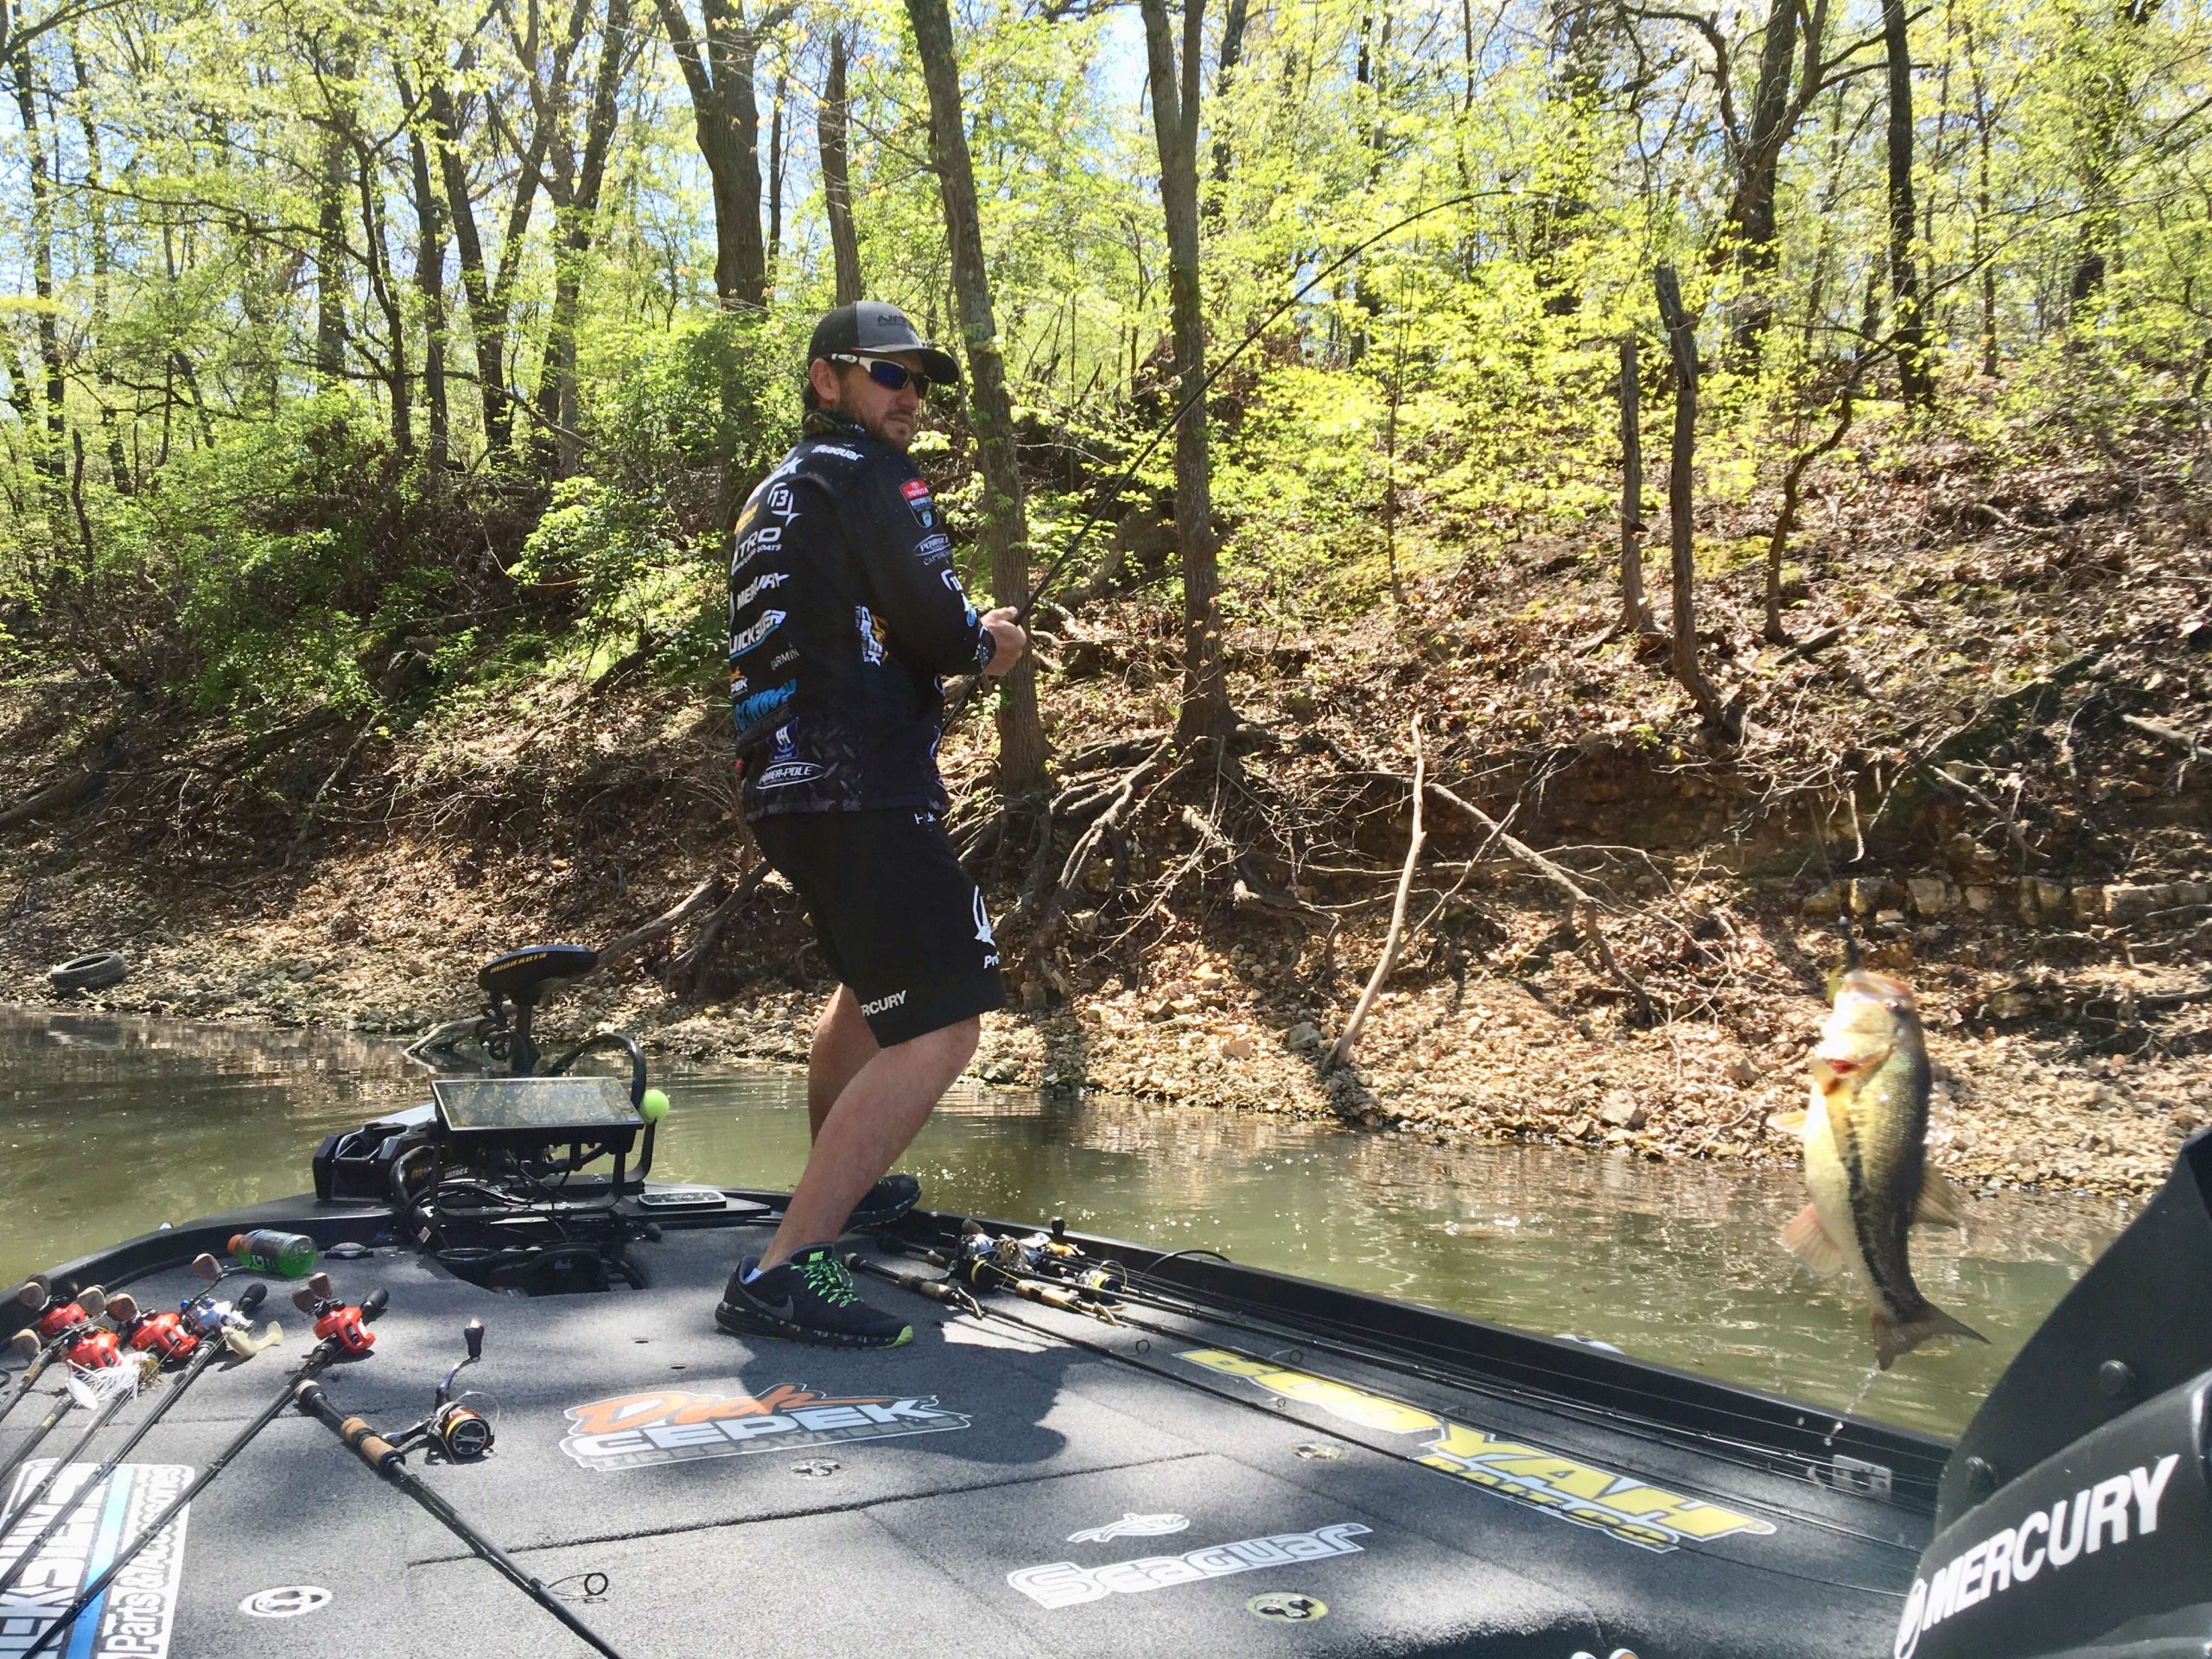 The sun is shining on Grand Lake and Stetson Blaylock. After boating one bed fish, he went straight to another fish he found on the second day of practice. He couldnât get her to bite yesterday, but within mere minutes of pulling up today sheâs in the box. Heâs on a roll right now. 